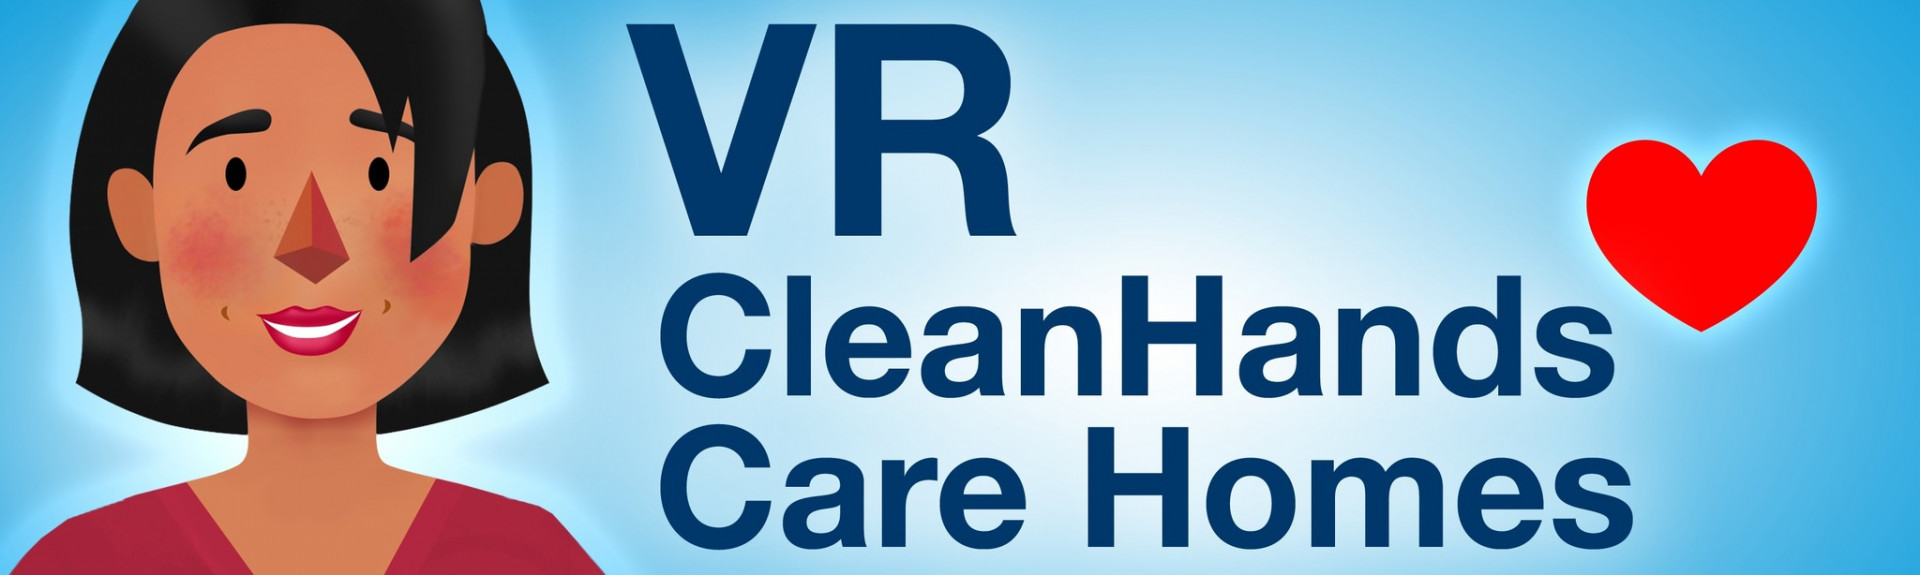 Tork VR Clean Hands Training for Care Homes